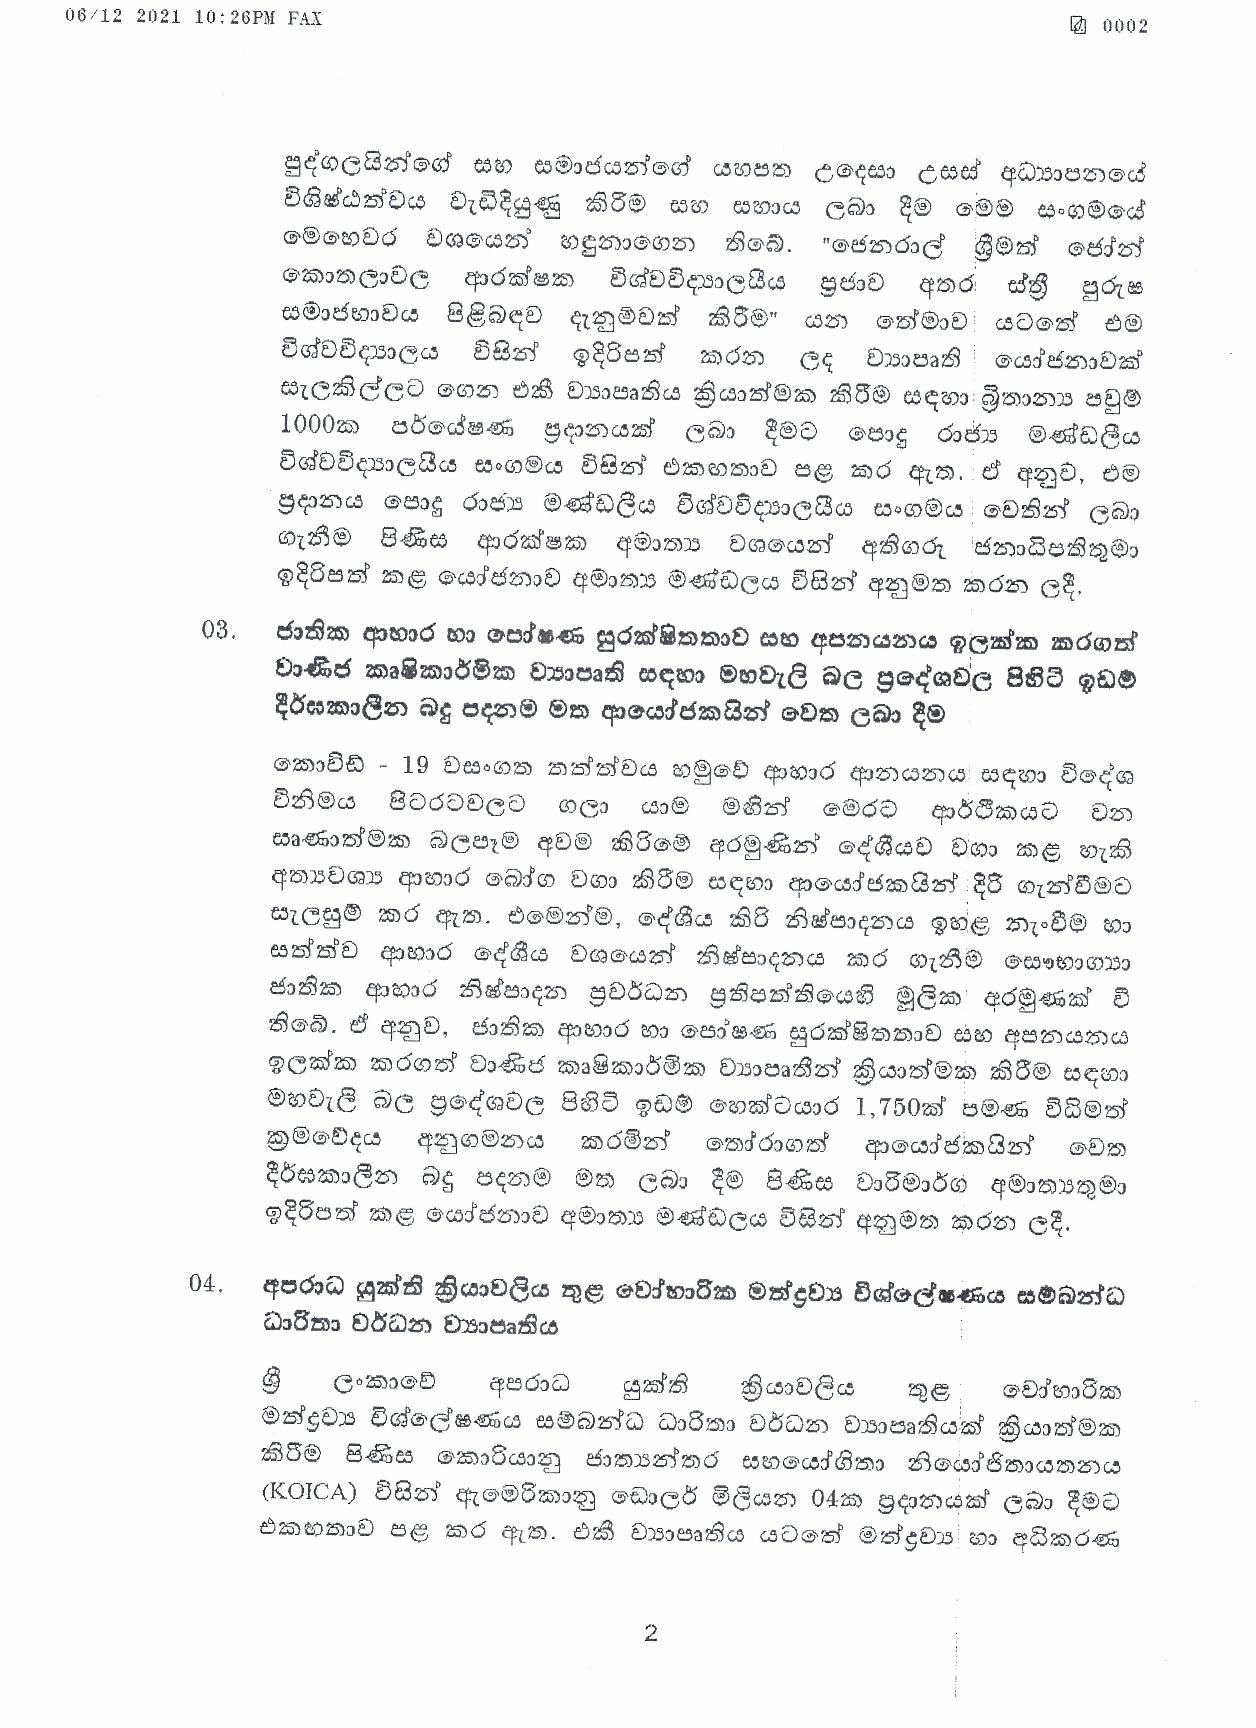 Cabinet Decision on 06.12.2021 page 002